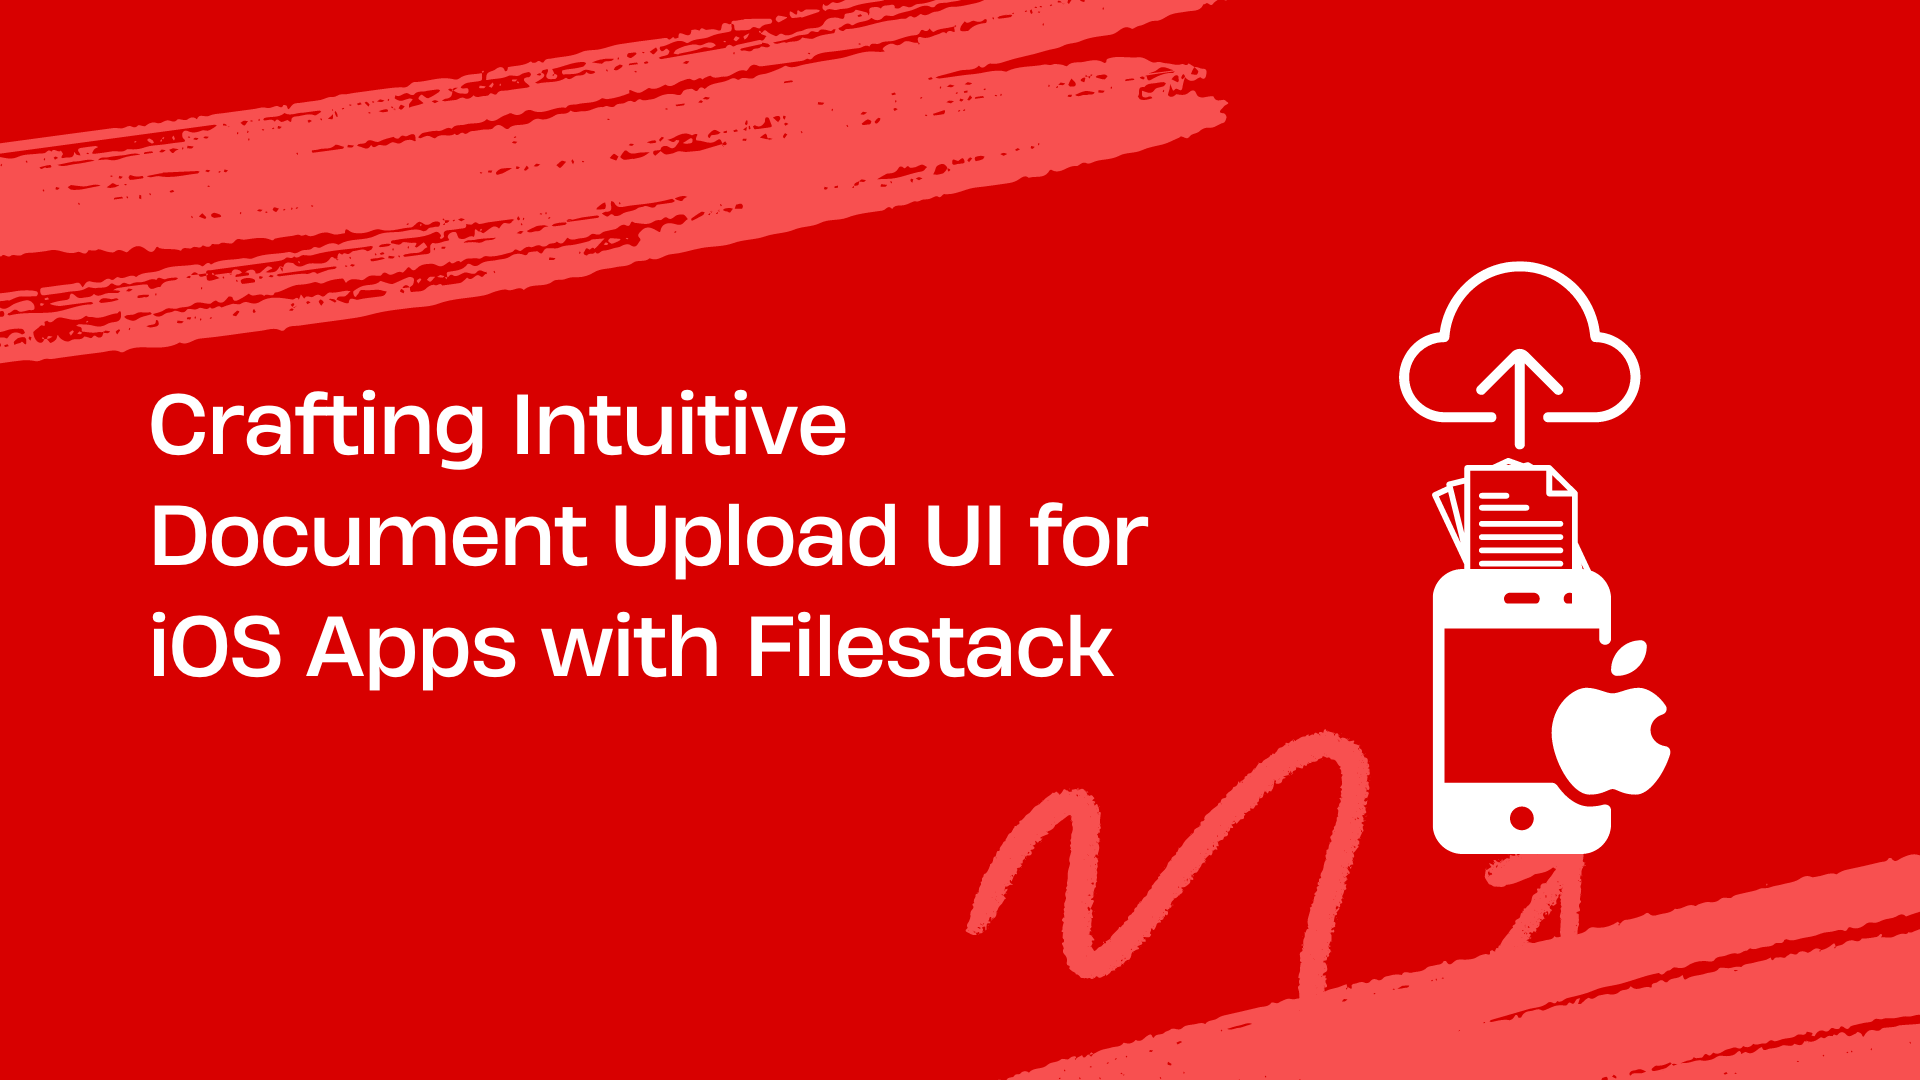 Crafting Intuitive Document Upload UI for iOS Apps with Filestack